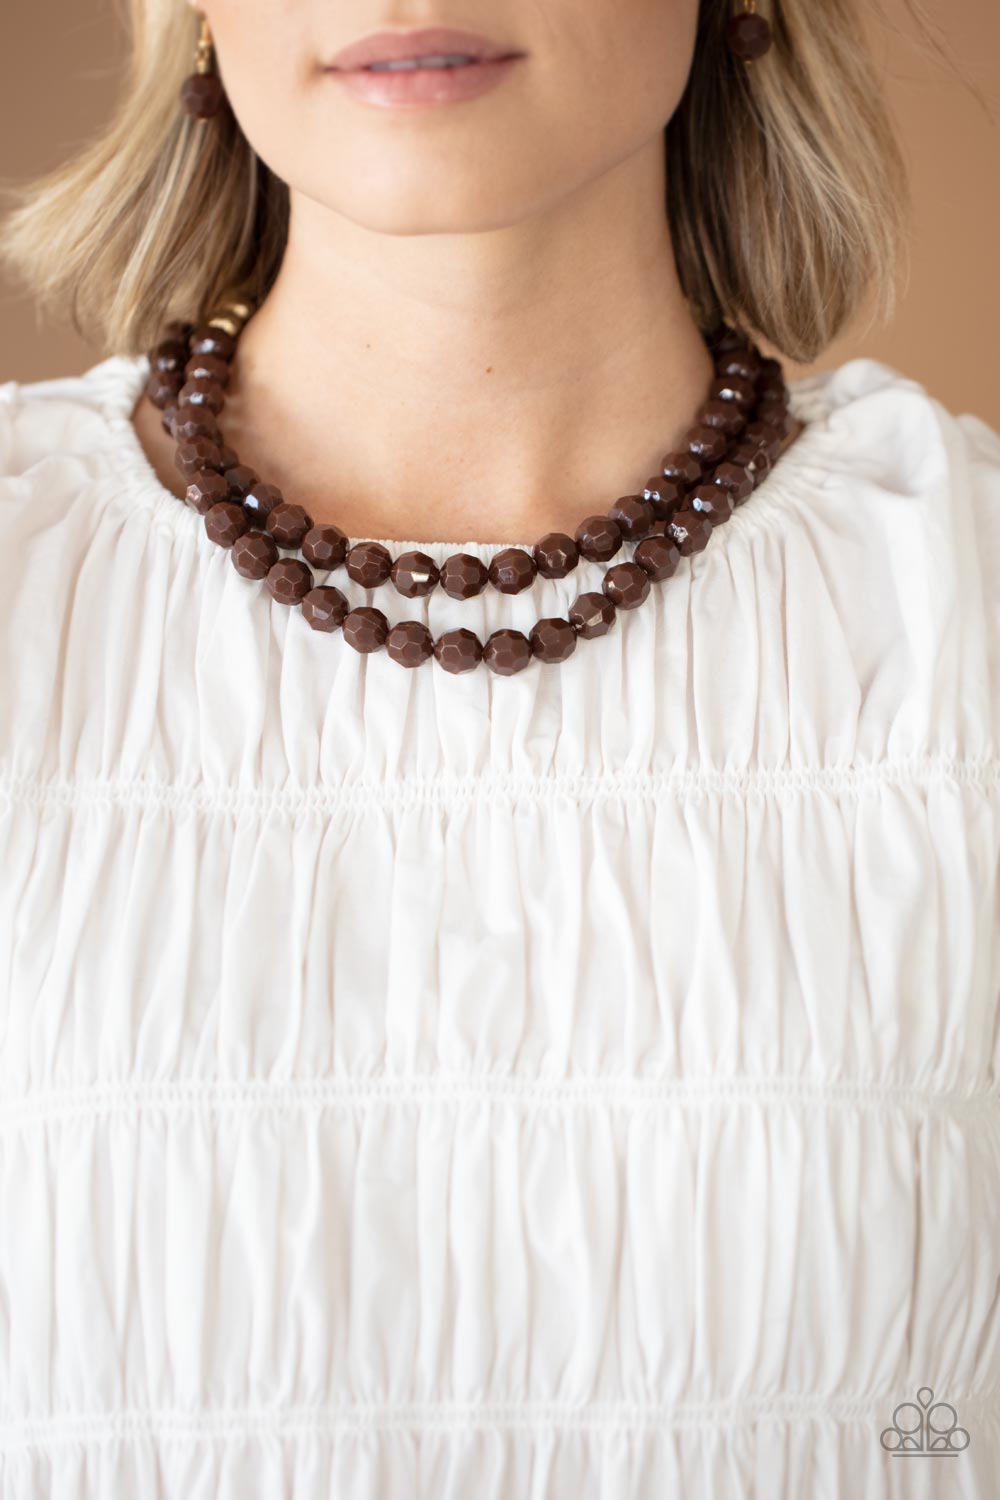 Paparazzi Accessories - Greco Getaway - Brown Necklaces faceted Coca Mocha and golden acrylic beads are threaded along invisible wires below the collar, creating a modern pop of color.  Sold as one individual necklace. Includes one pair of matching earrings.  Get The Complete Look! Bracelet: "Grecian Glamour - Brown" (Sold Separately)